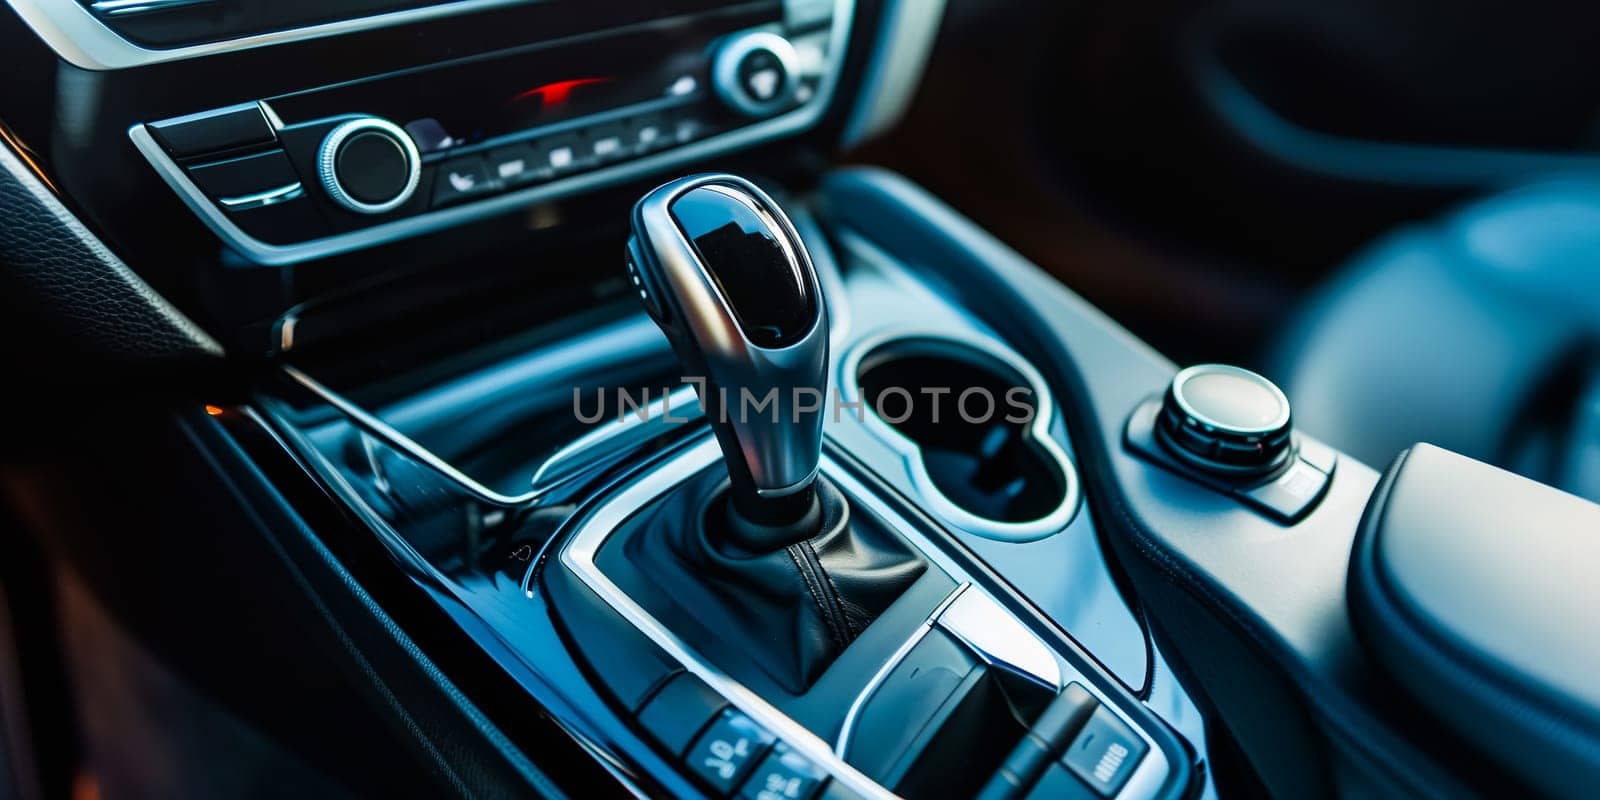 Automatic gear stick of a modern car. Modern car interior details. Close up view. Car detailing. Automatic transmission lever shift.